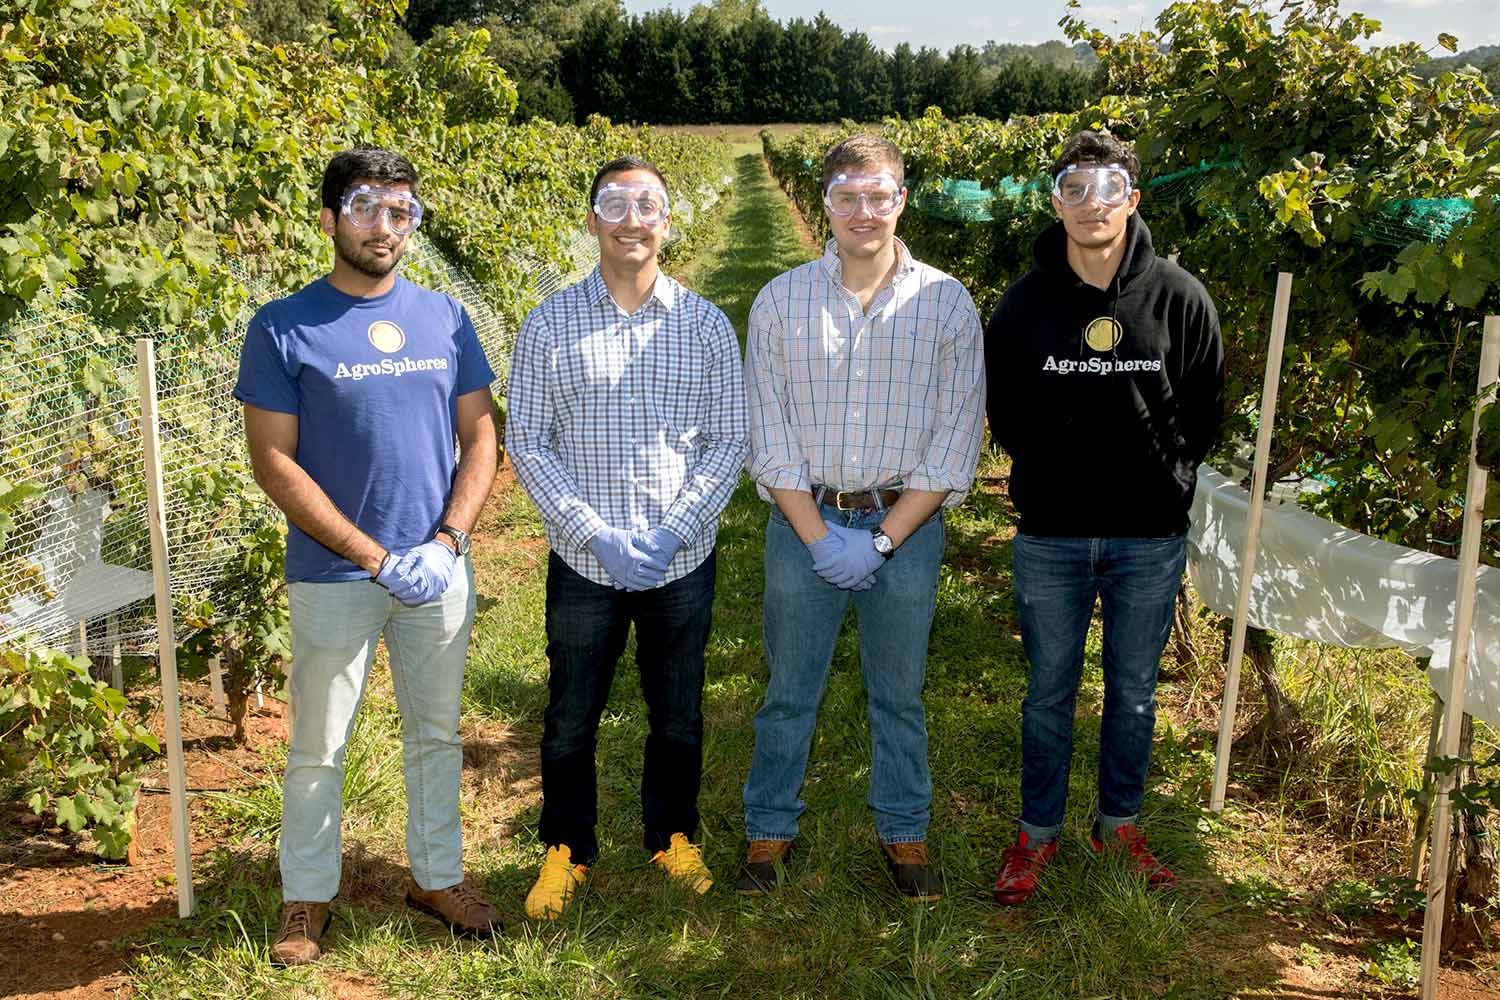 Four members of the Agrospheres team from left to right: Ameer Shakeel, Payam Pourtaheri, Zach Davis and Sepehr Zomorodi.